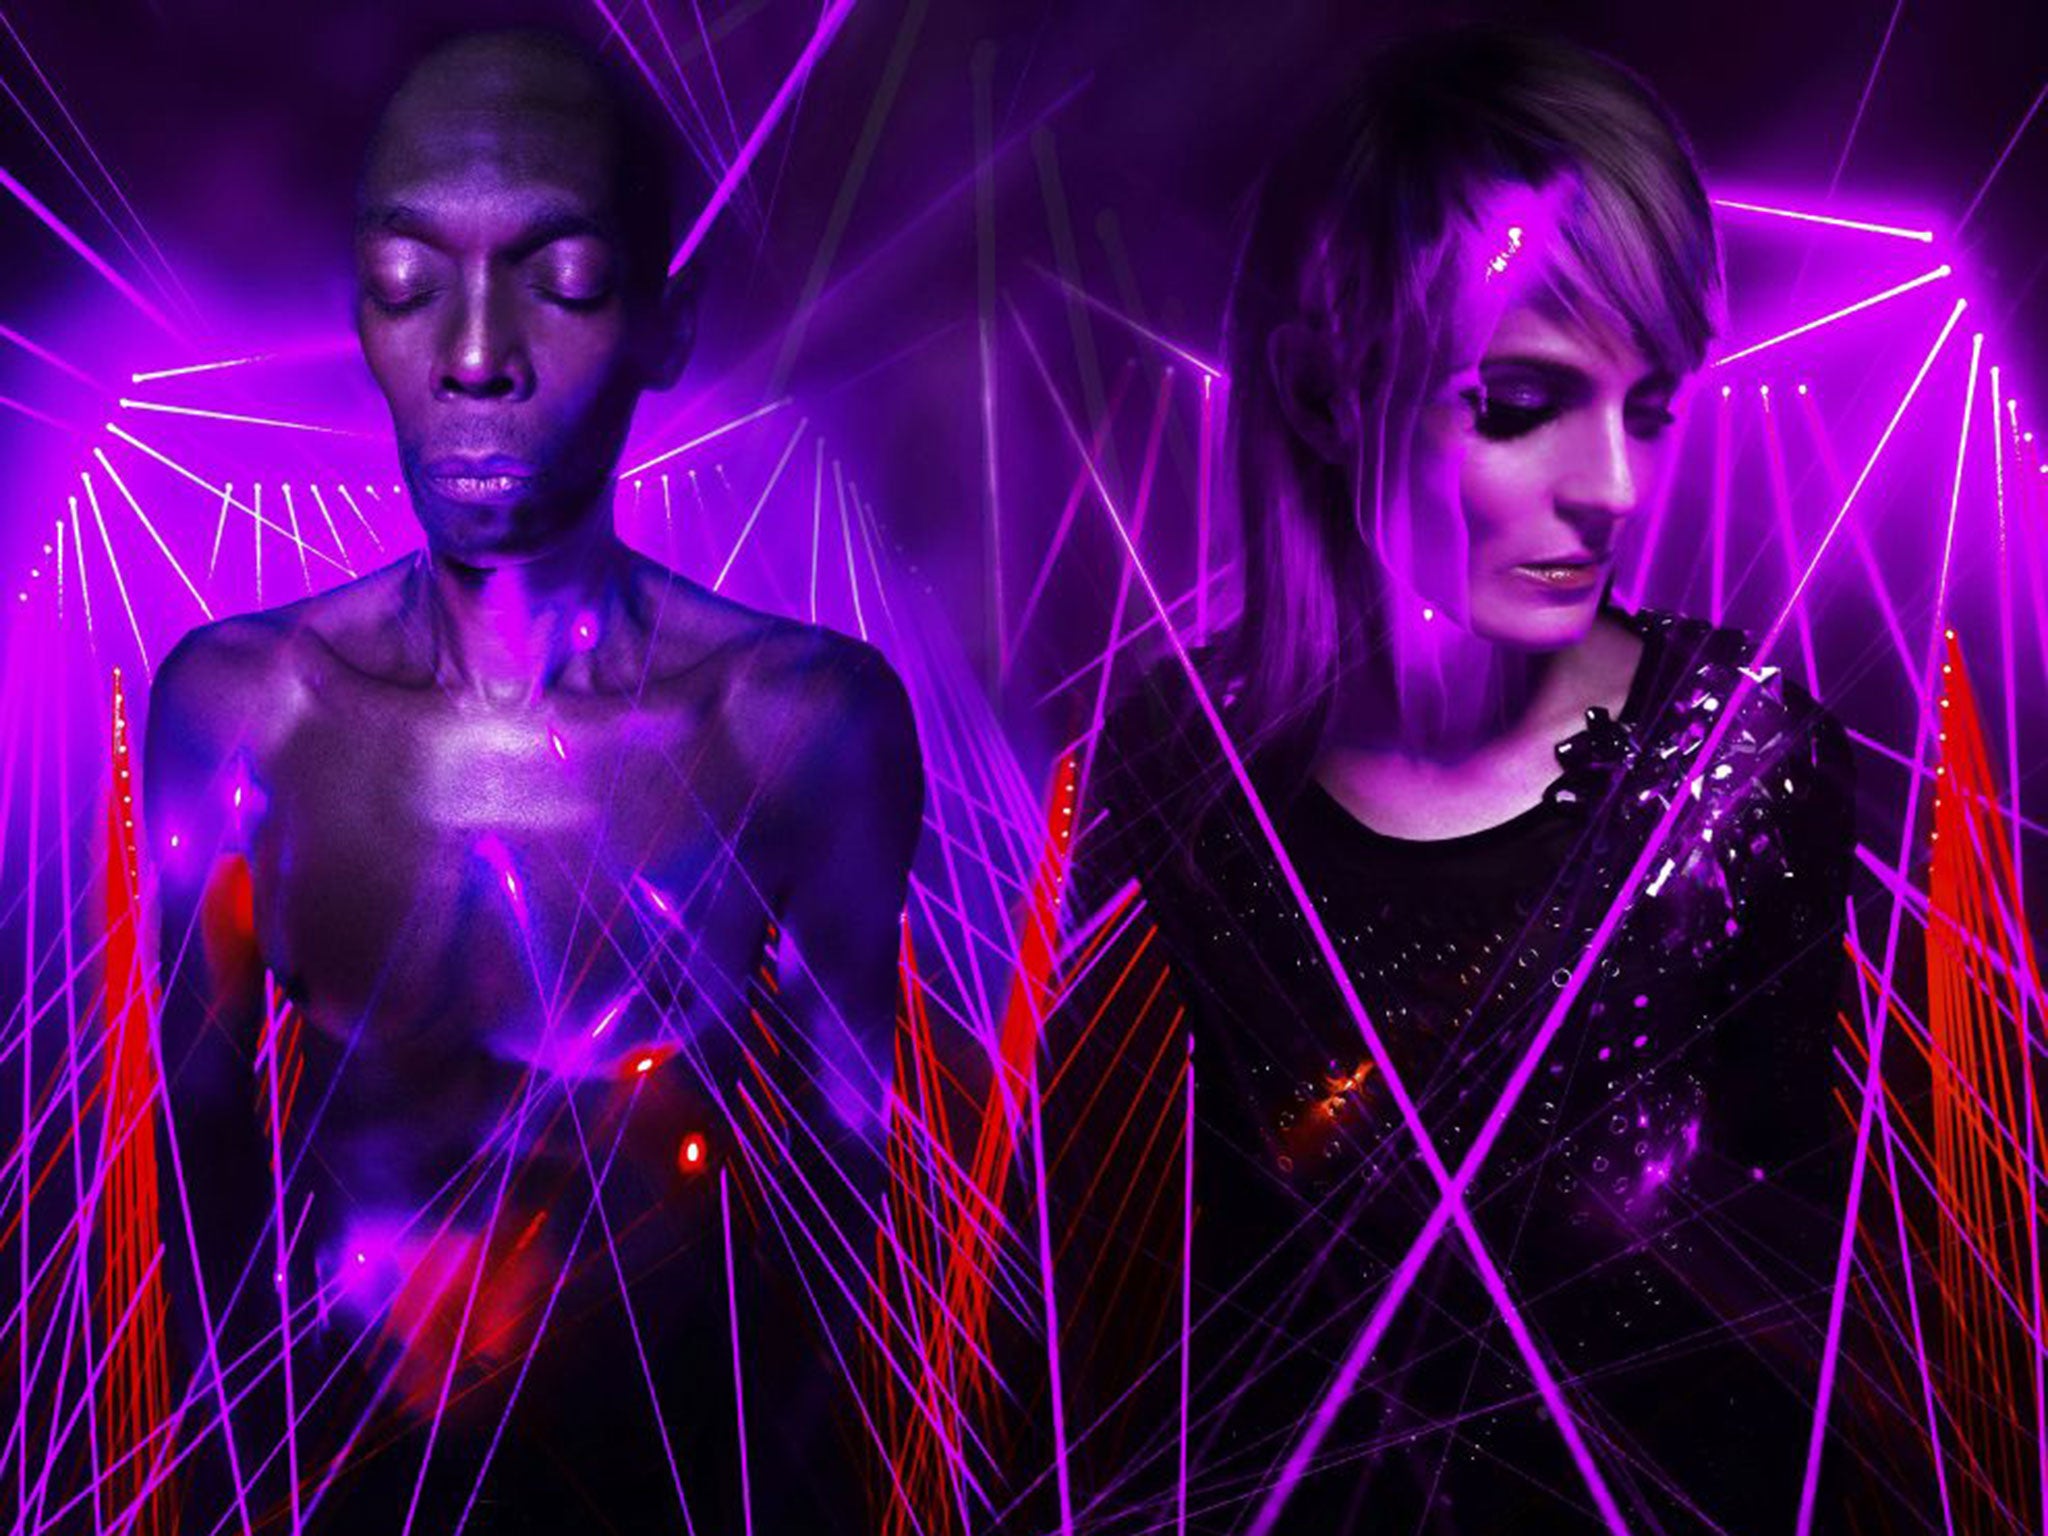 Faithless are widely regarded as pioneers in British dance music